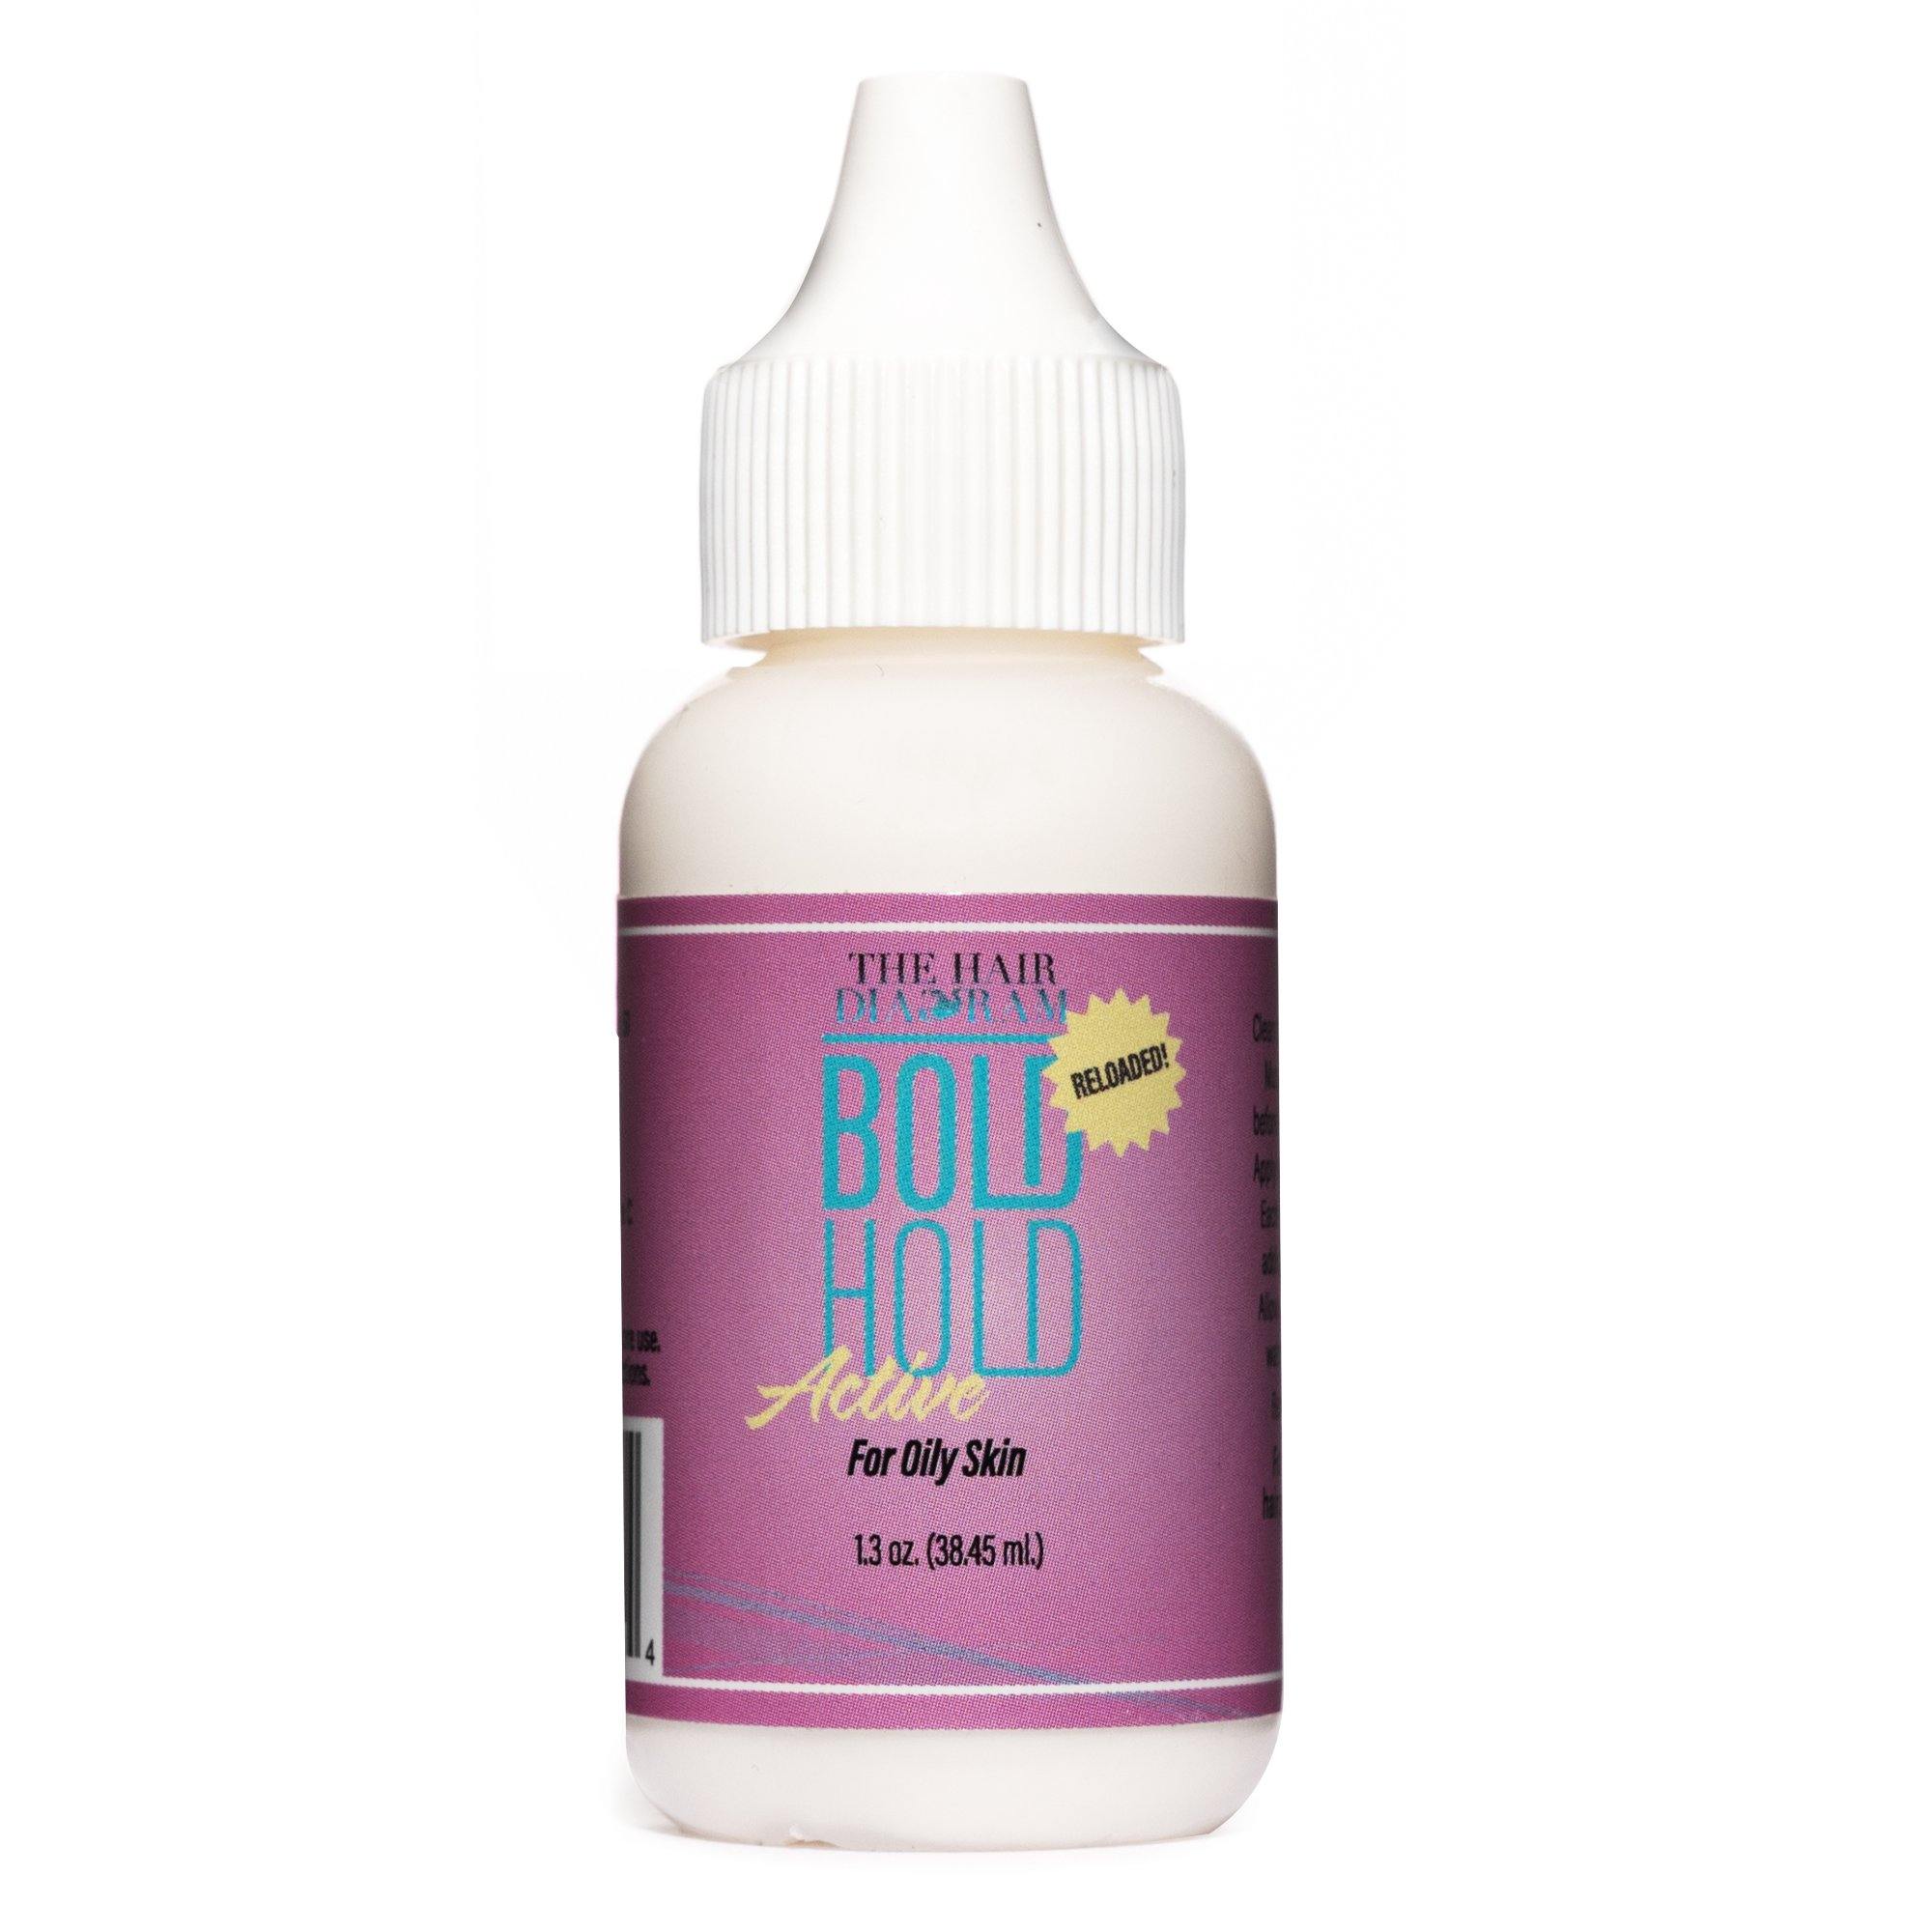 Bold Hold Active® Reloaded 1.3oz